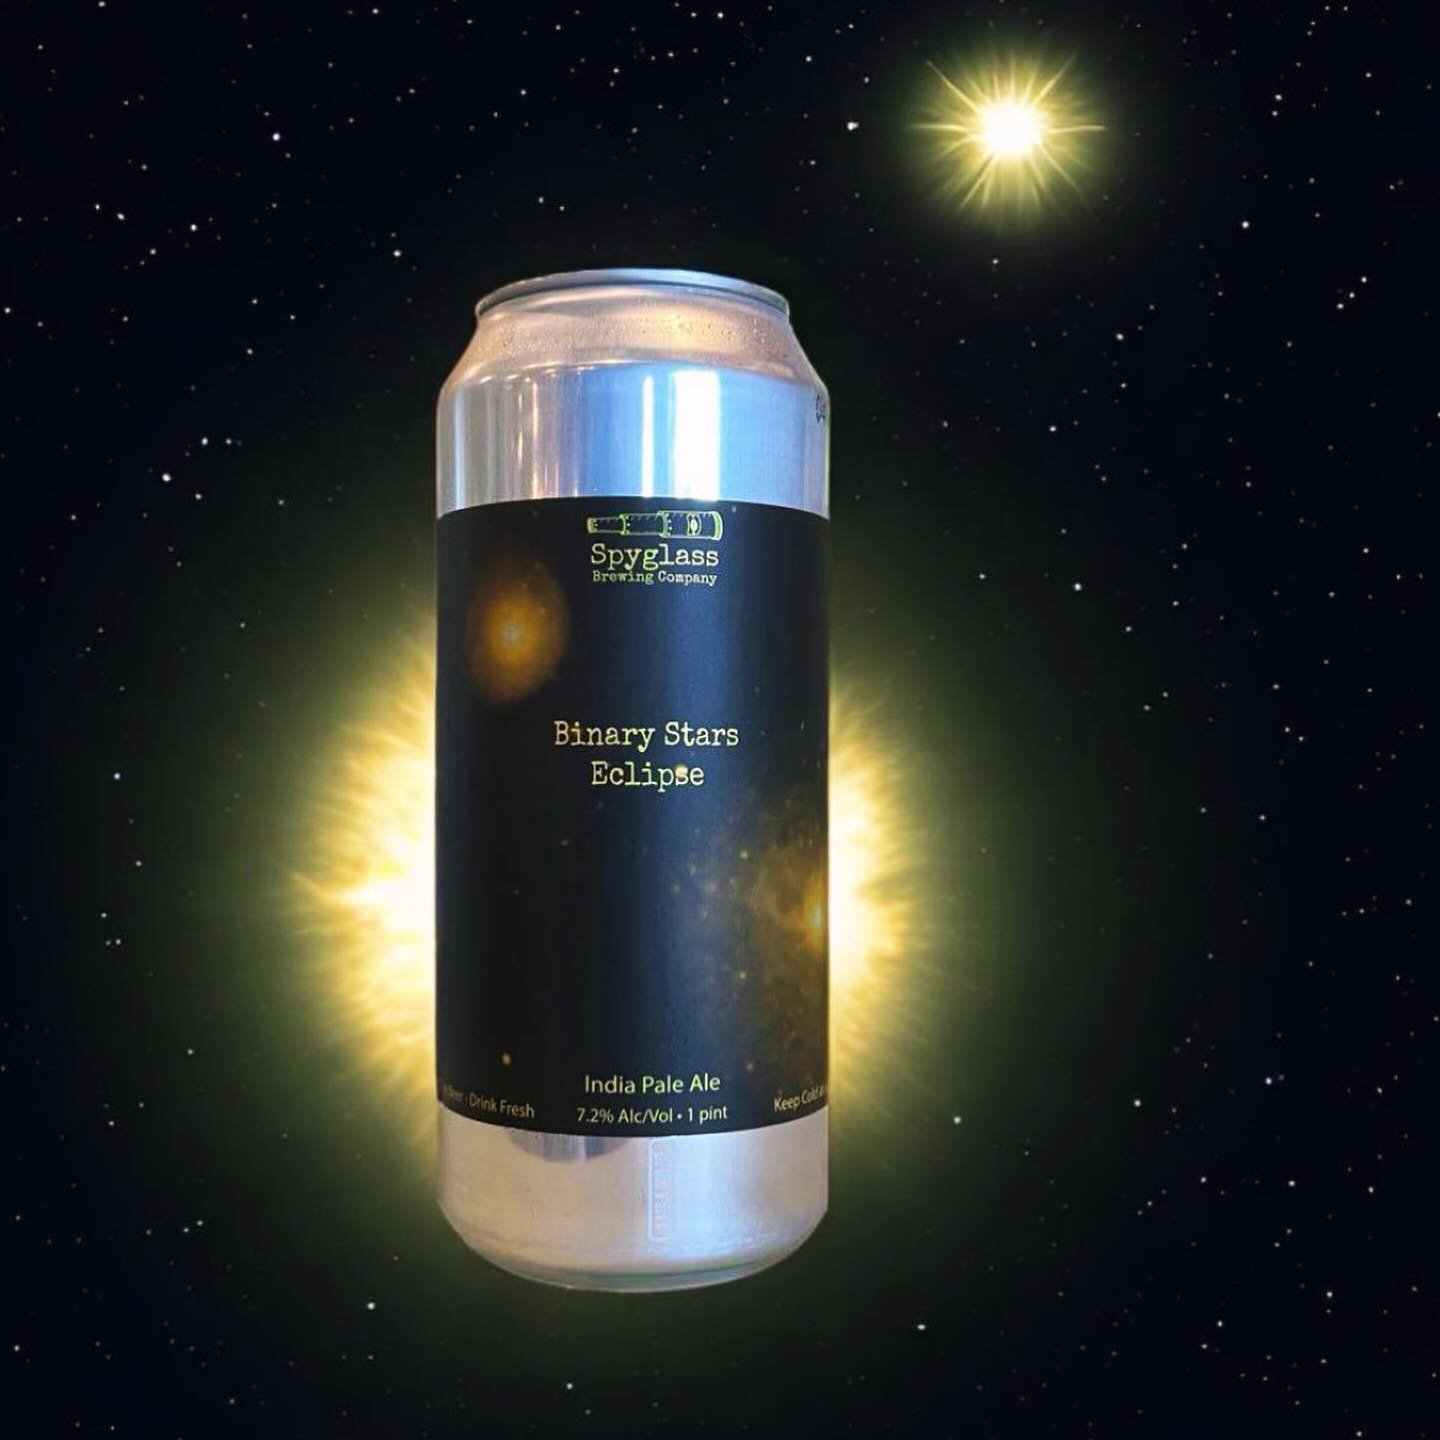 ✨Binary Stars Eclipse🌒

7.2% ABV New England IPA
Eclipse hops are given their time to shine and bring along a tropical melange with undertones of pink lemonade, nectarine, and woodsy pine. This beer has a bitter bite that lingers just long enough an